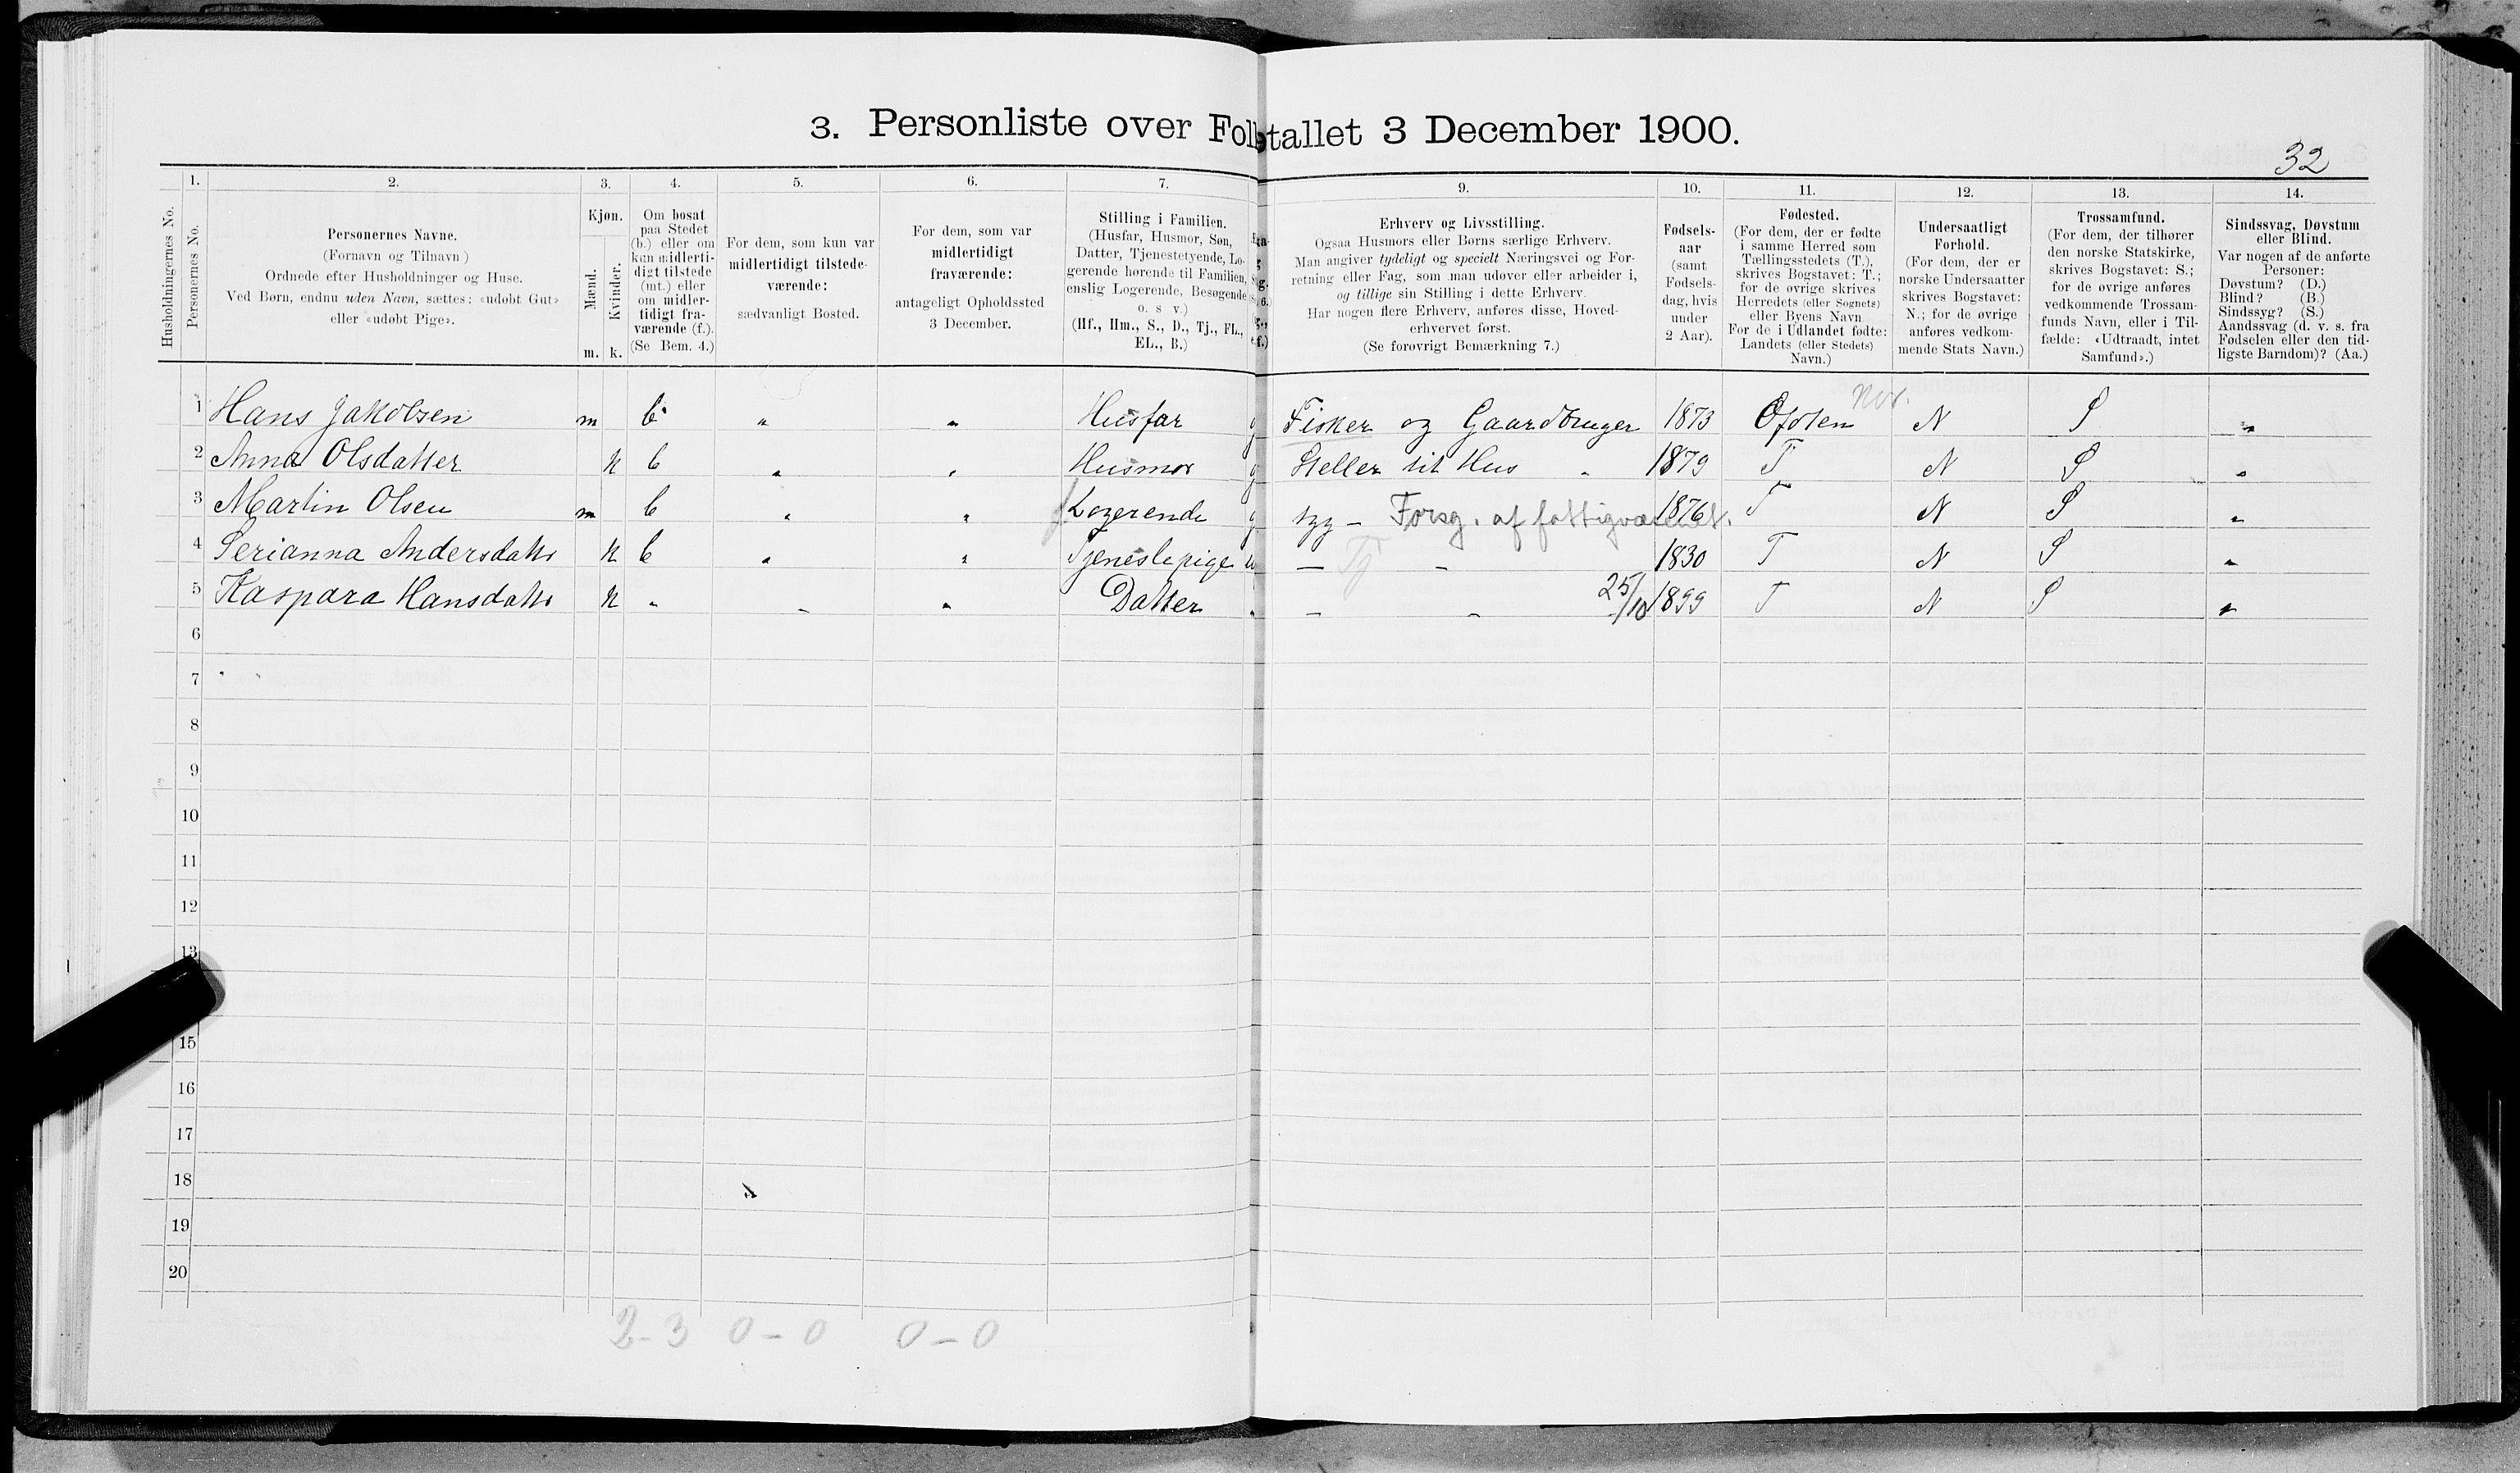 SAT, 1900 census for Tysfjord, 1900, p. 45